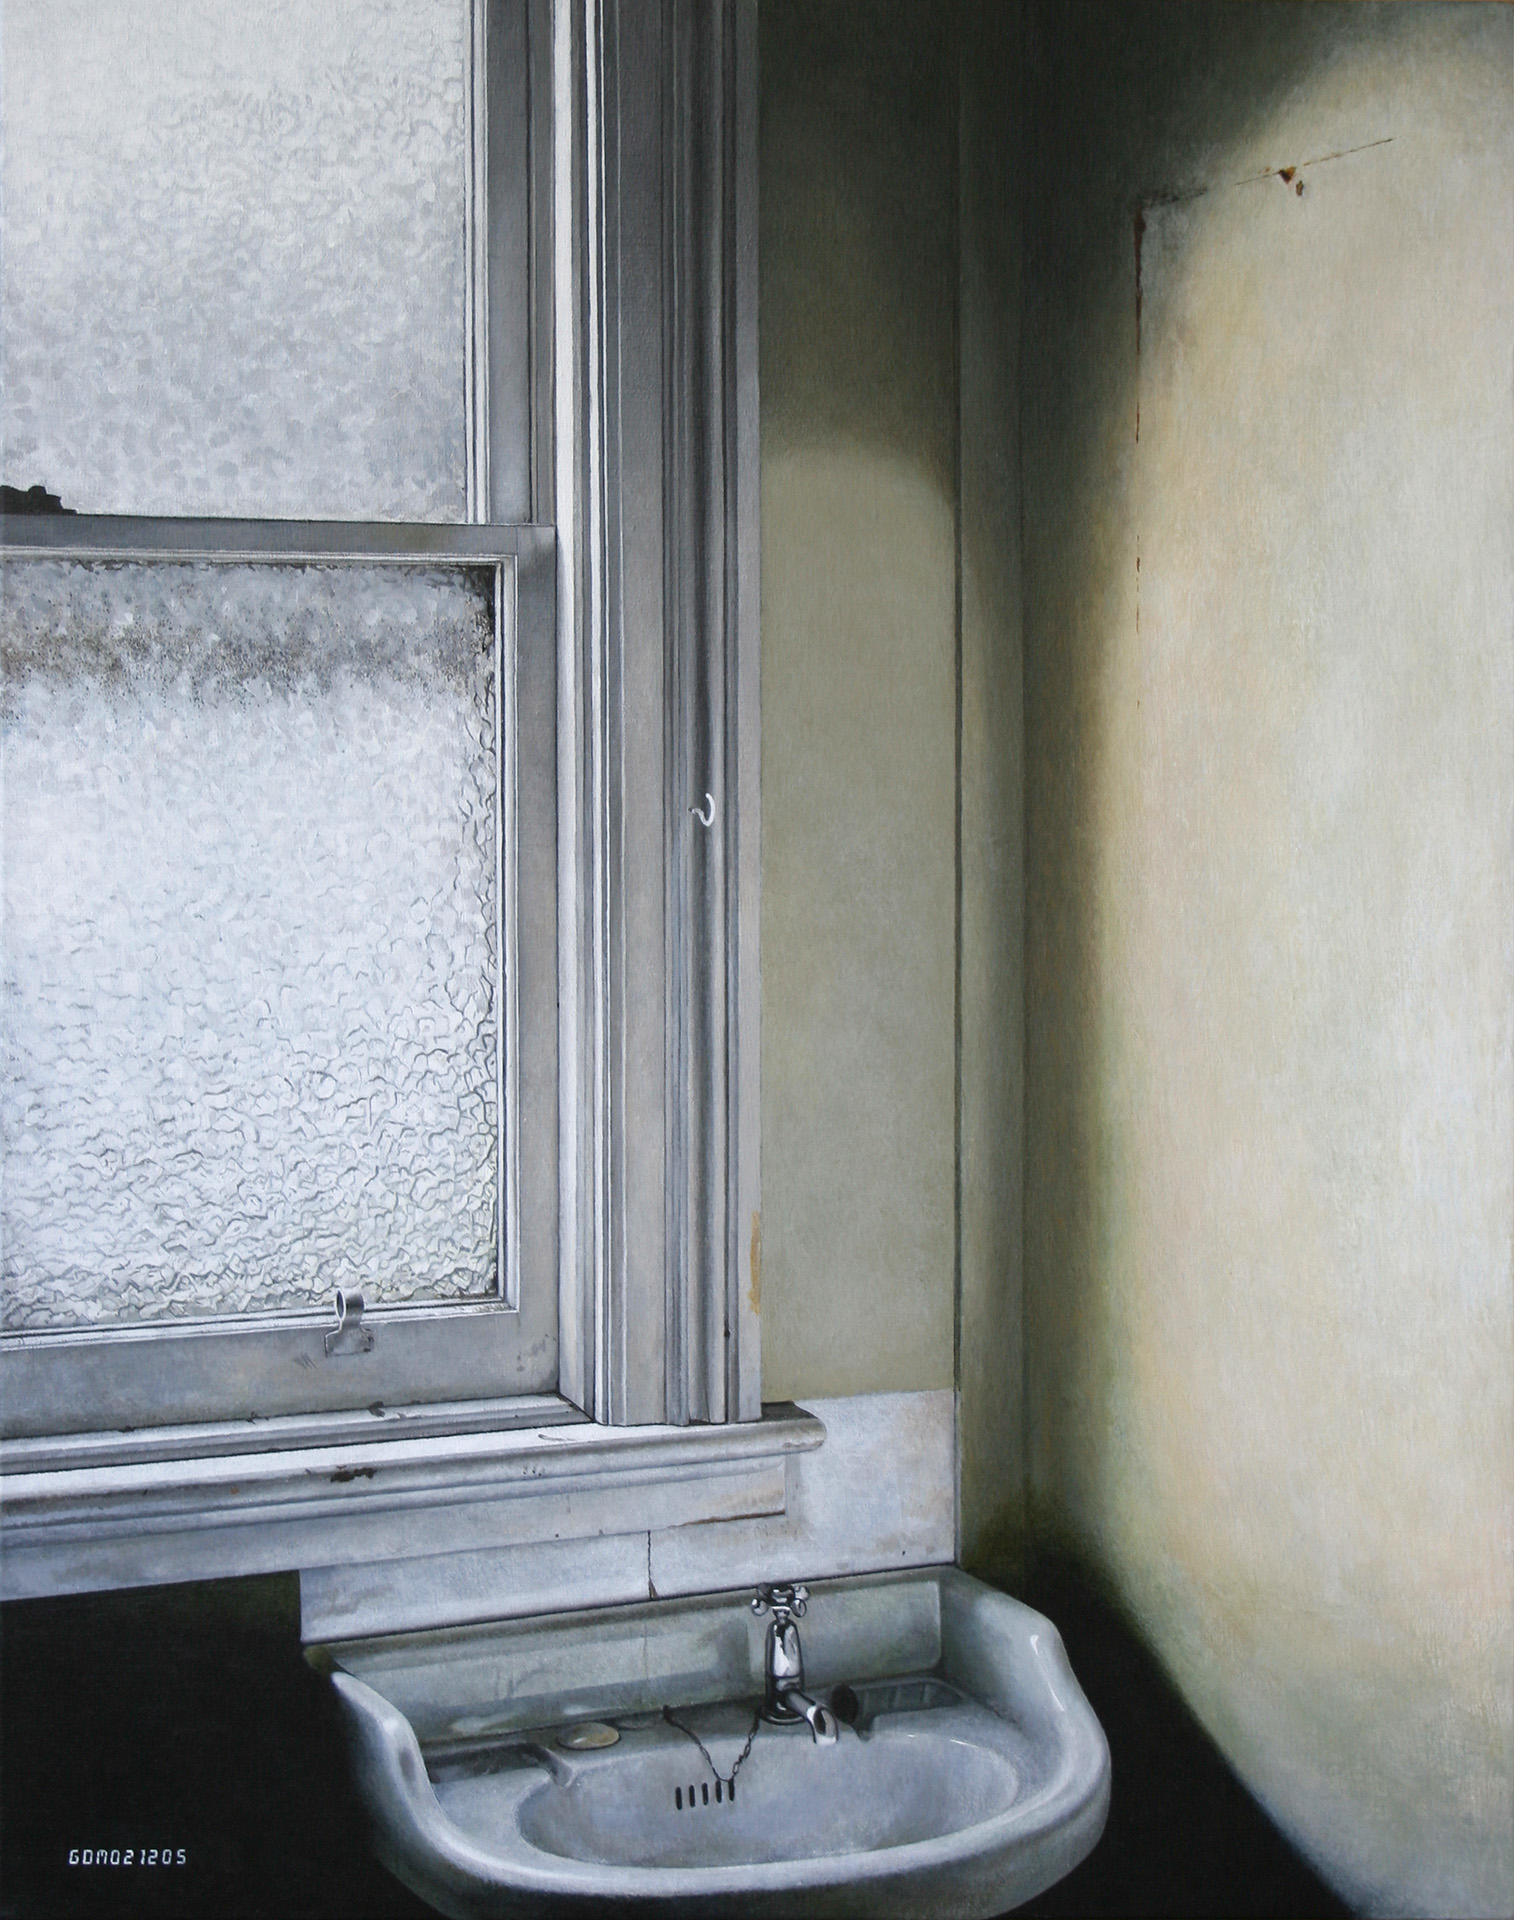 Sink, 2005, acrylic on linen, 710 x 555mm, private collection